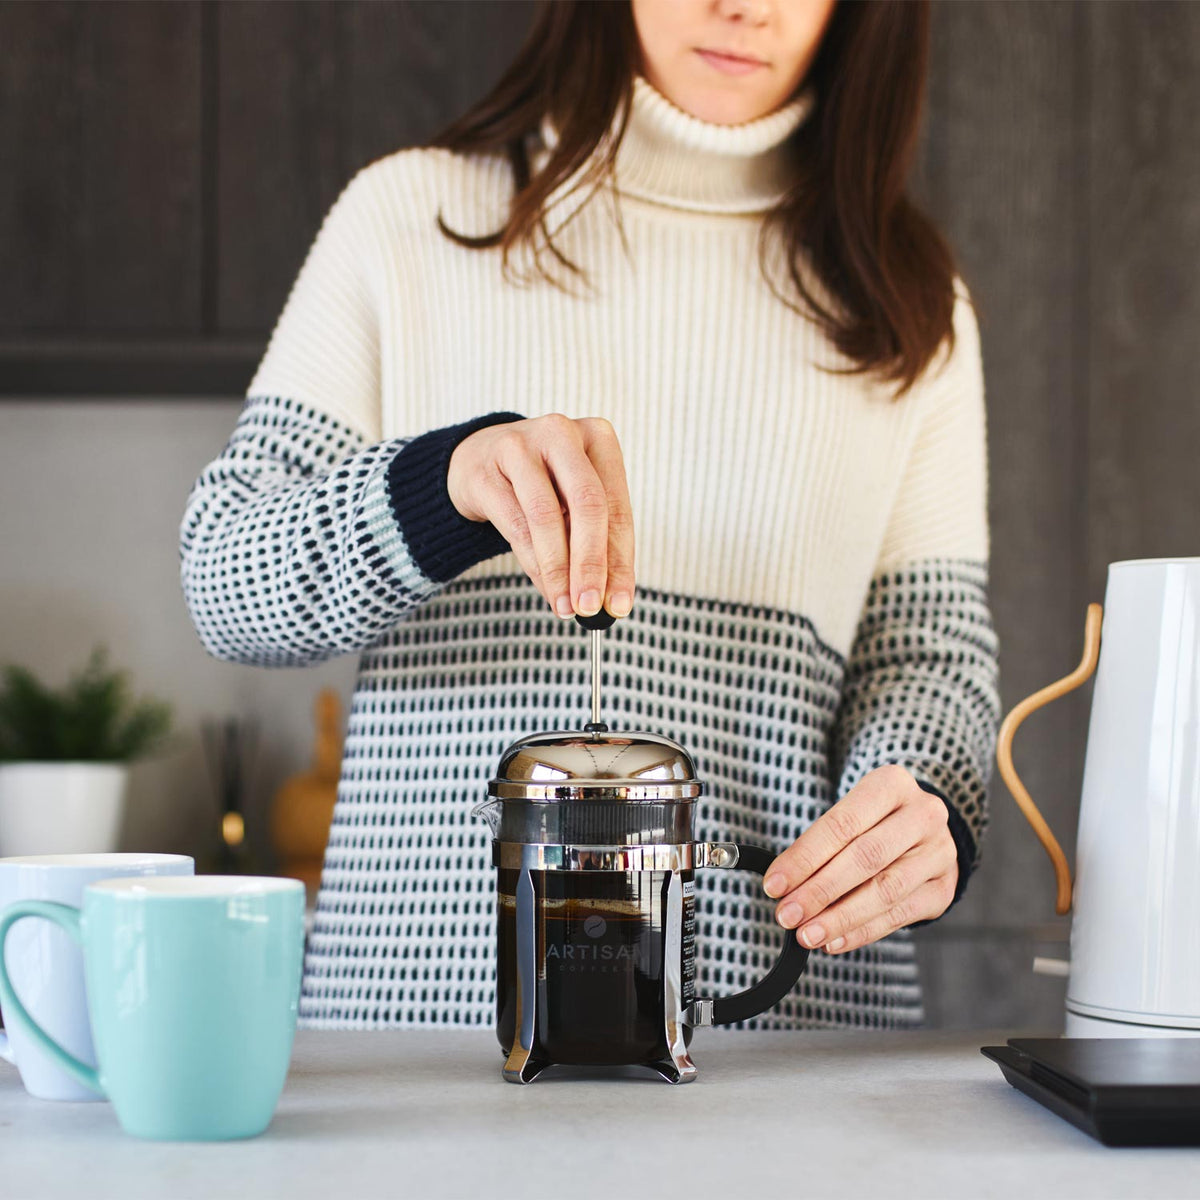 artisan-coffee-co_filter-artisan-coffee-cafetiere